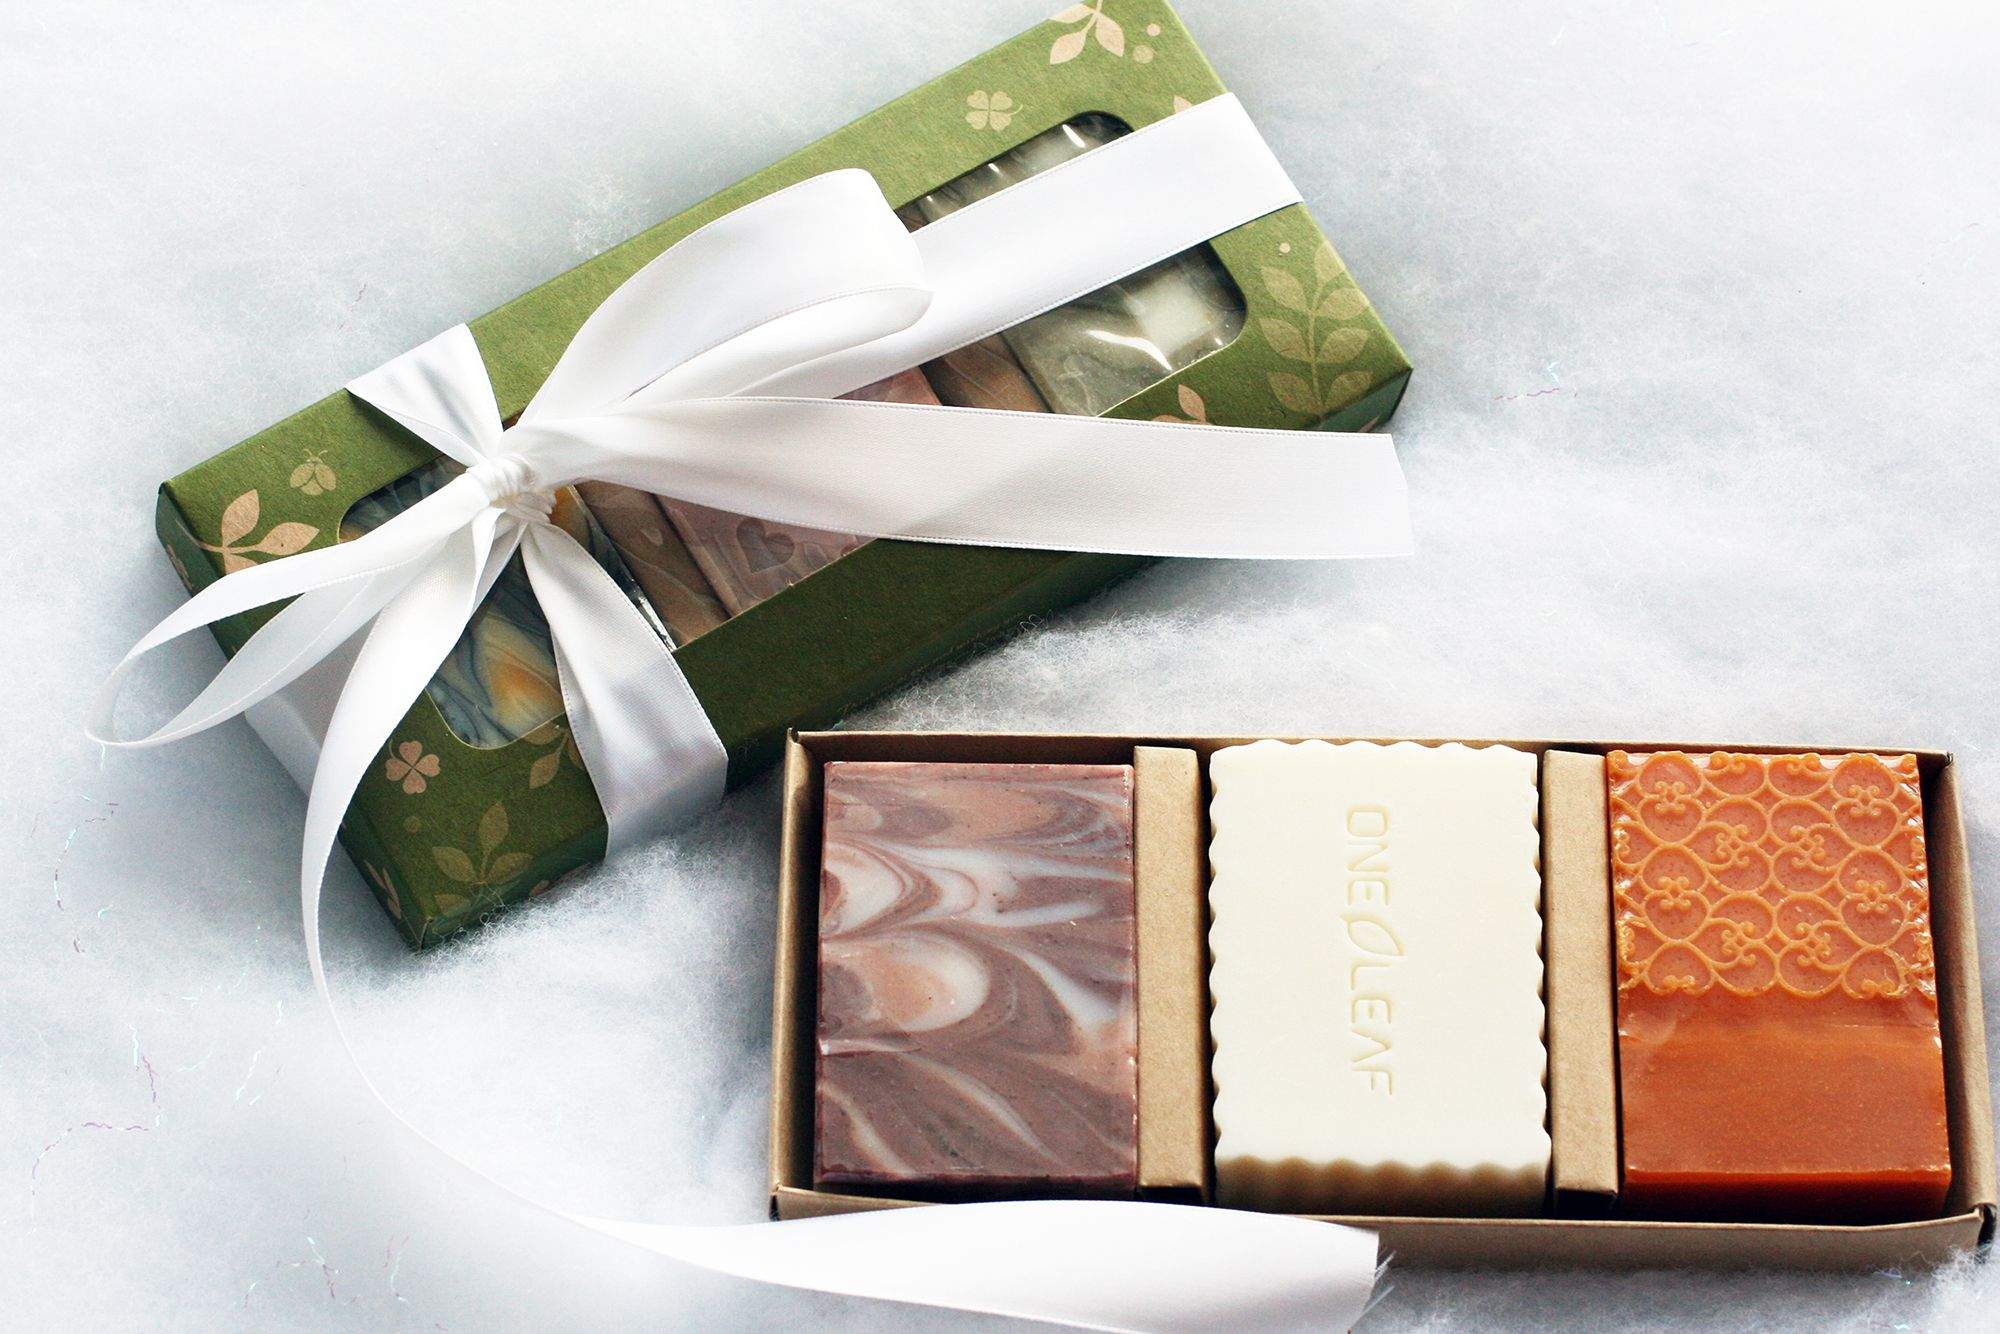 How can Online Vendors Create Lasting Relationships using Custom Soap Boxes?